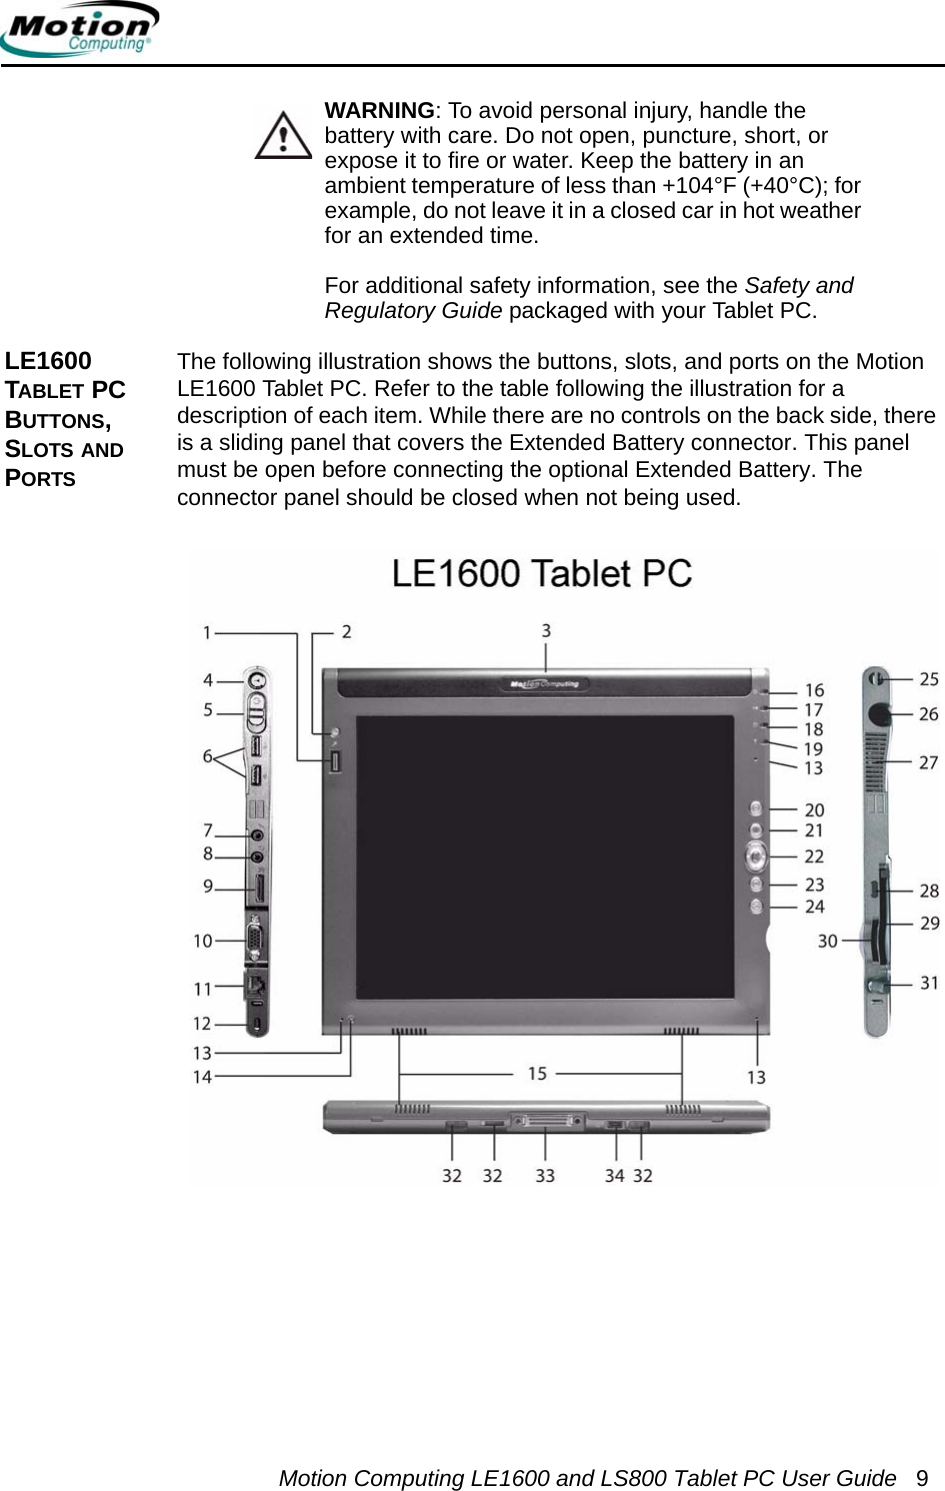 Motion Computing LE1600 and LS800 Tablet PC User Guide 9WARNING: To avoid personal injury, handle the battery with care. Do not open, puncture, short, or expose it to fire or water. Keep the battery in an ambient temperature of less than +104°F (+40°C); for example, do not leave it in a closed car in hot weather for an extended time.For additional safety information, see the Safety and Regulatory Guide packaged with your Tablet PC.LE1600 TABLET PC BUTTONS, SLOTS AND PORTSThe following illustration shows the buttons, slots, and ports on the Motion LE1600 Tablet PC. Refer to the table following the illustration for a description of each item. While there are no controls on the back side, there is a sliding panel that covers the Extended Battery connector. This panel must be open before connecting the optional Extended Battery. The connector panel should be closed when not being used.